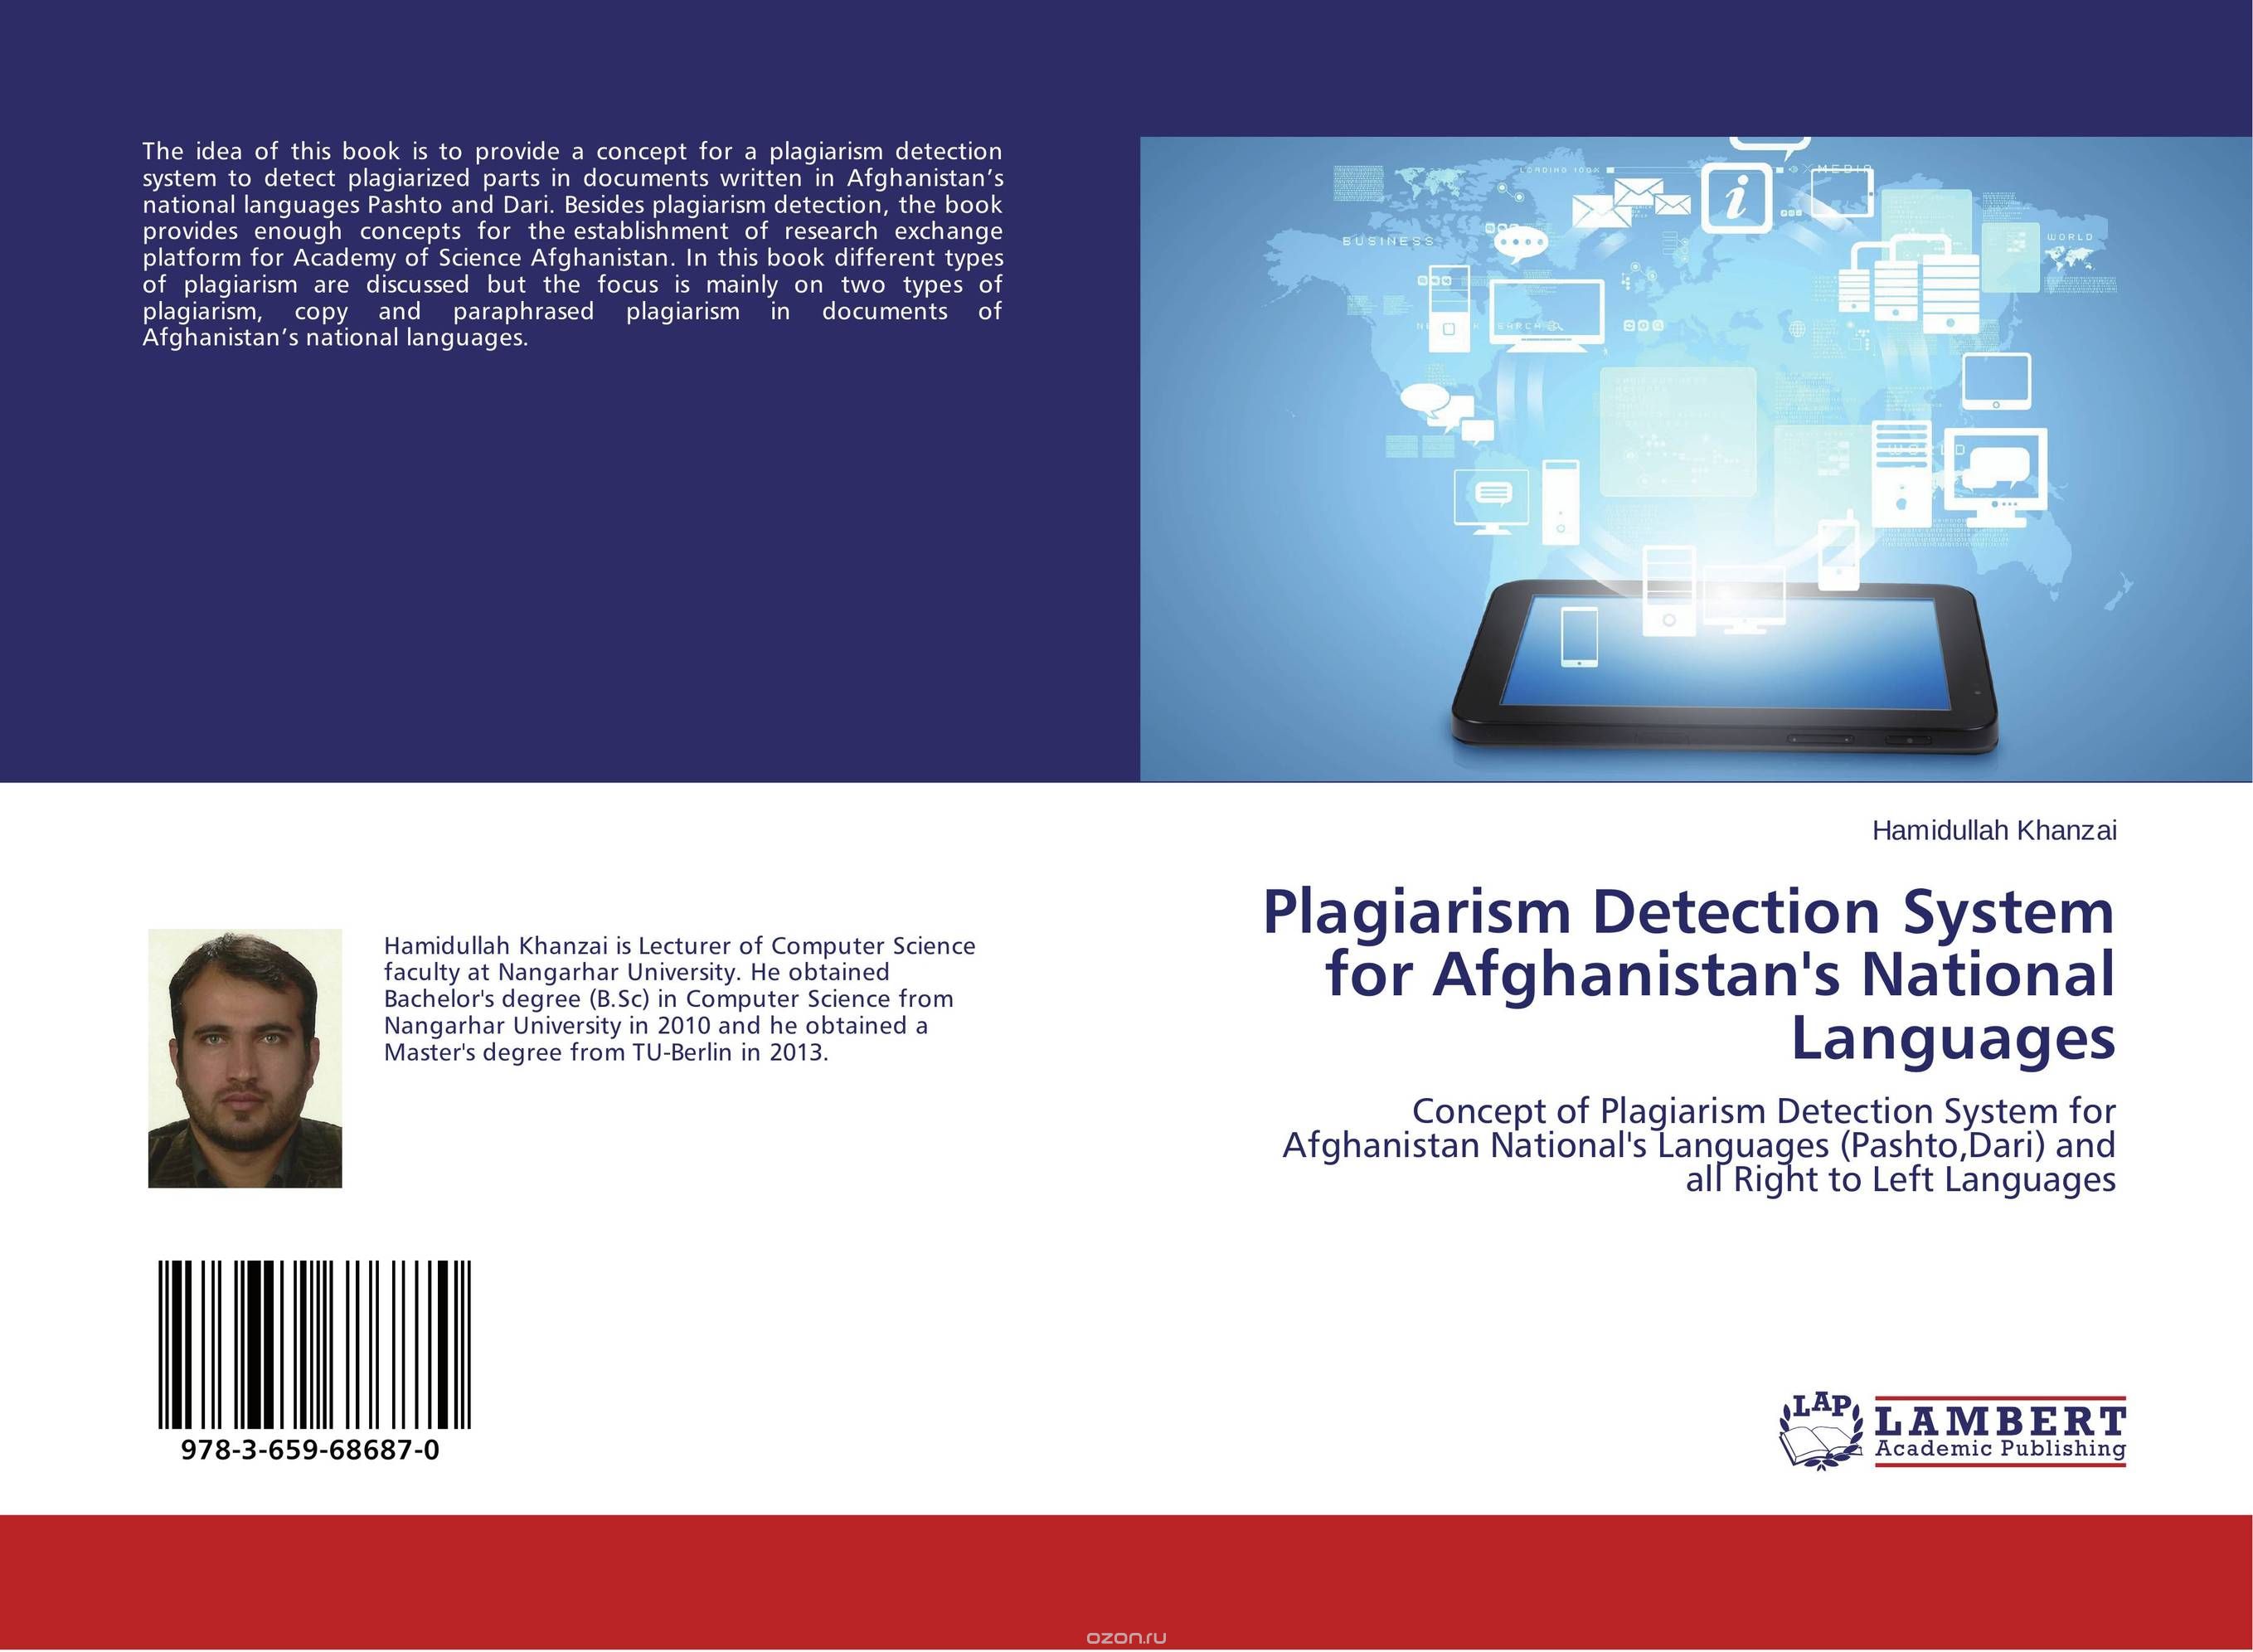 Plagiarism Detection System for Afghanistan's National Languages